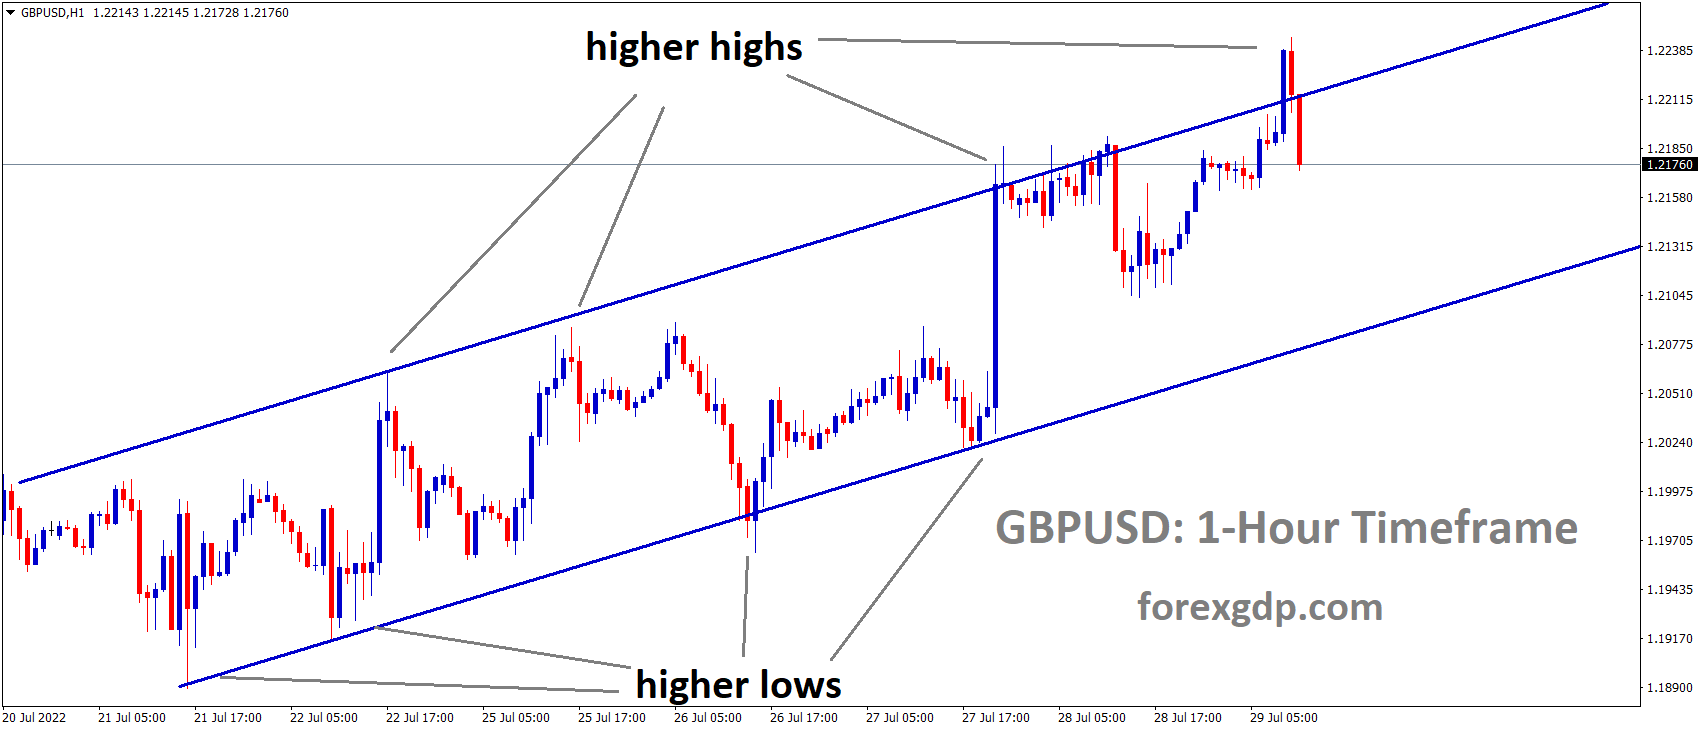 GBPUSD H1 TF analysis Market is moving in an Ascending channel and the Market has fallen from the higher high area of the channel.